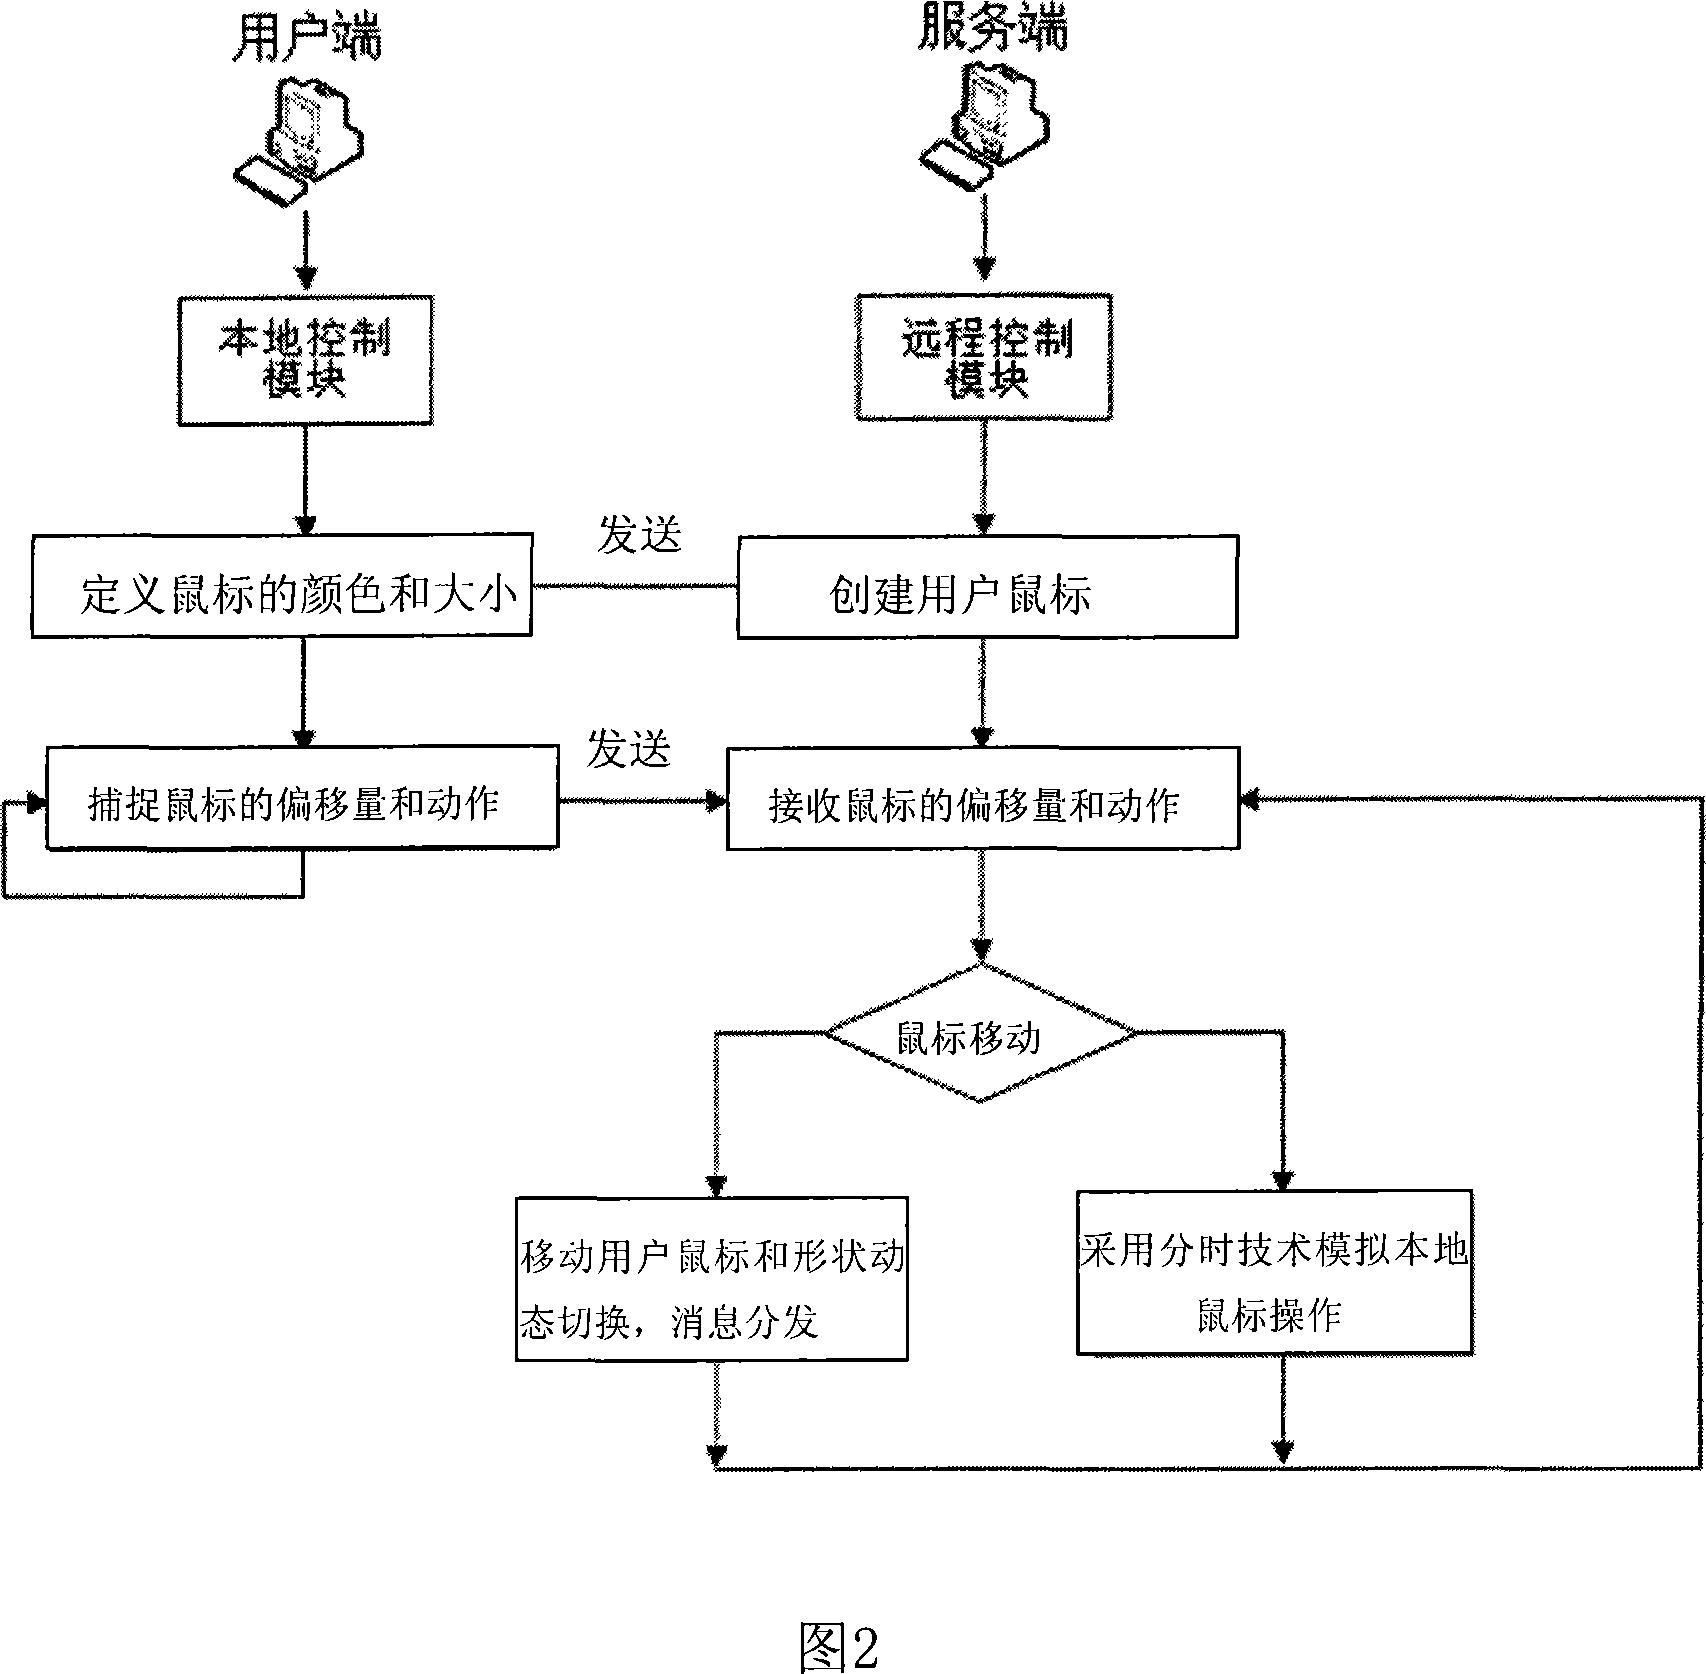 Multi-mouse long-distance control method to service end